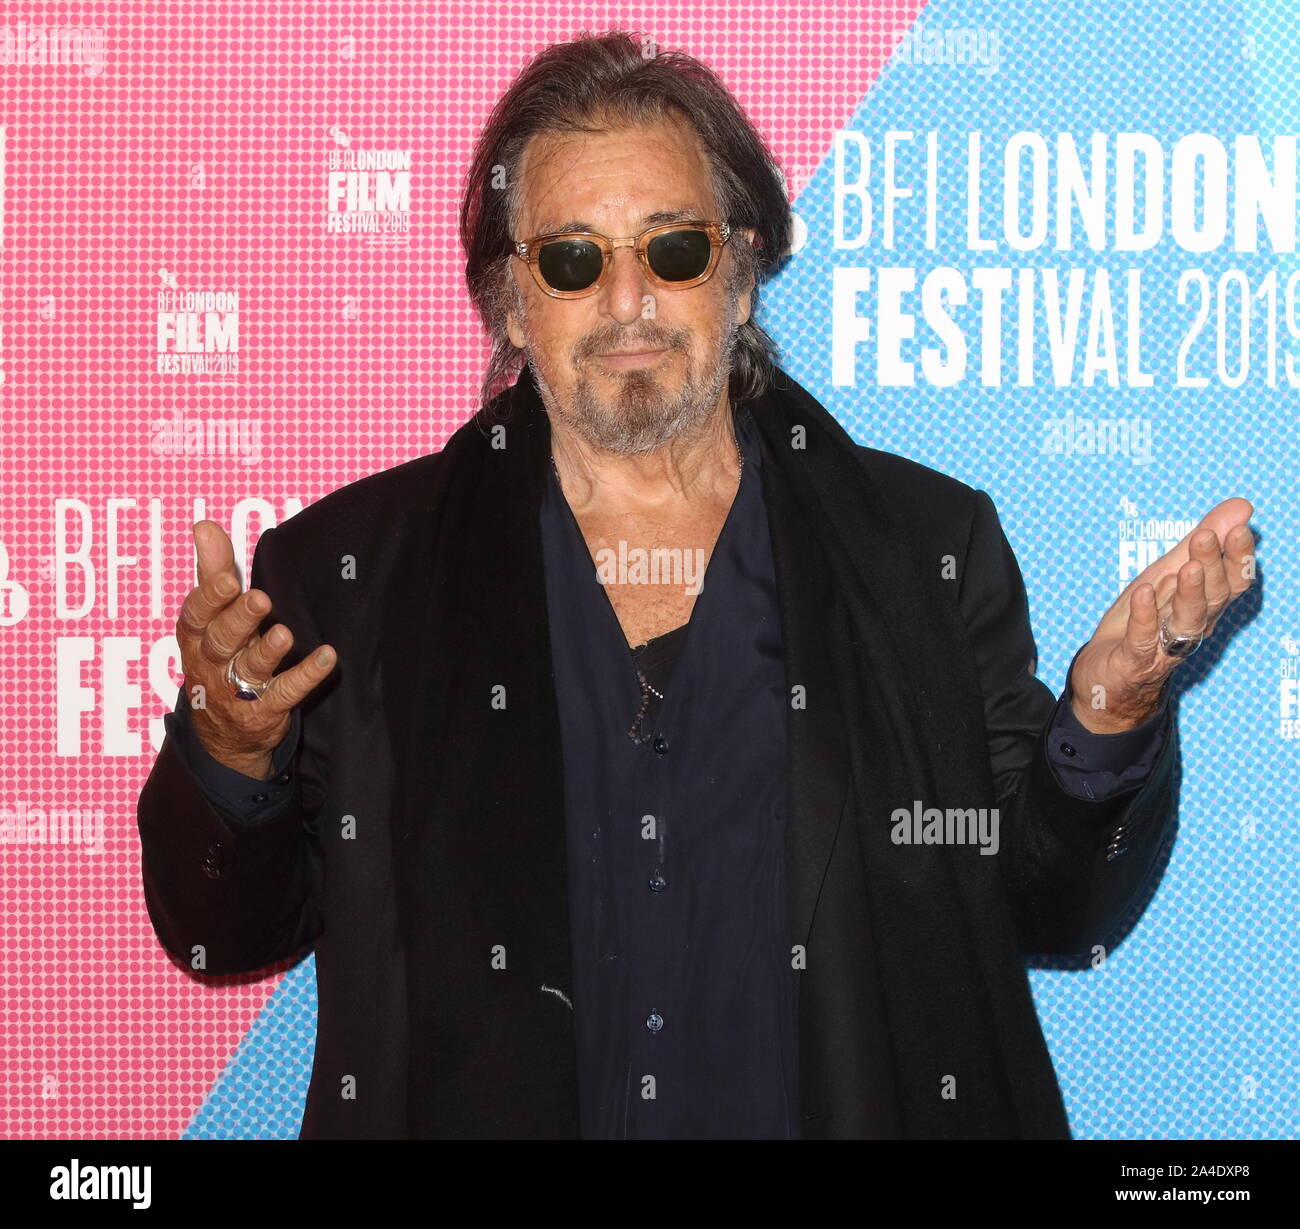 Al Pacino attends The Irishman Photocall during the 63rd BFI London Film Festival at The Mayfair Hotel in London. Stock Photo